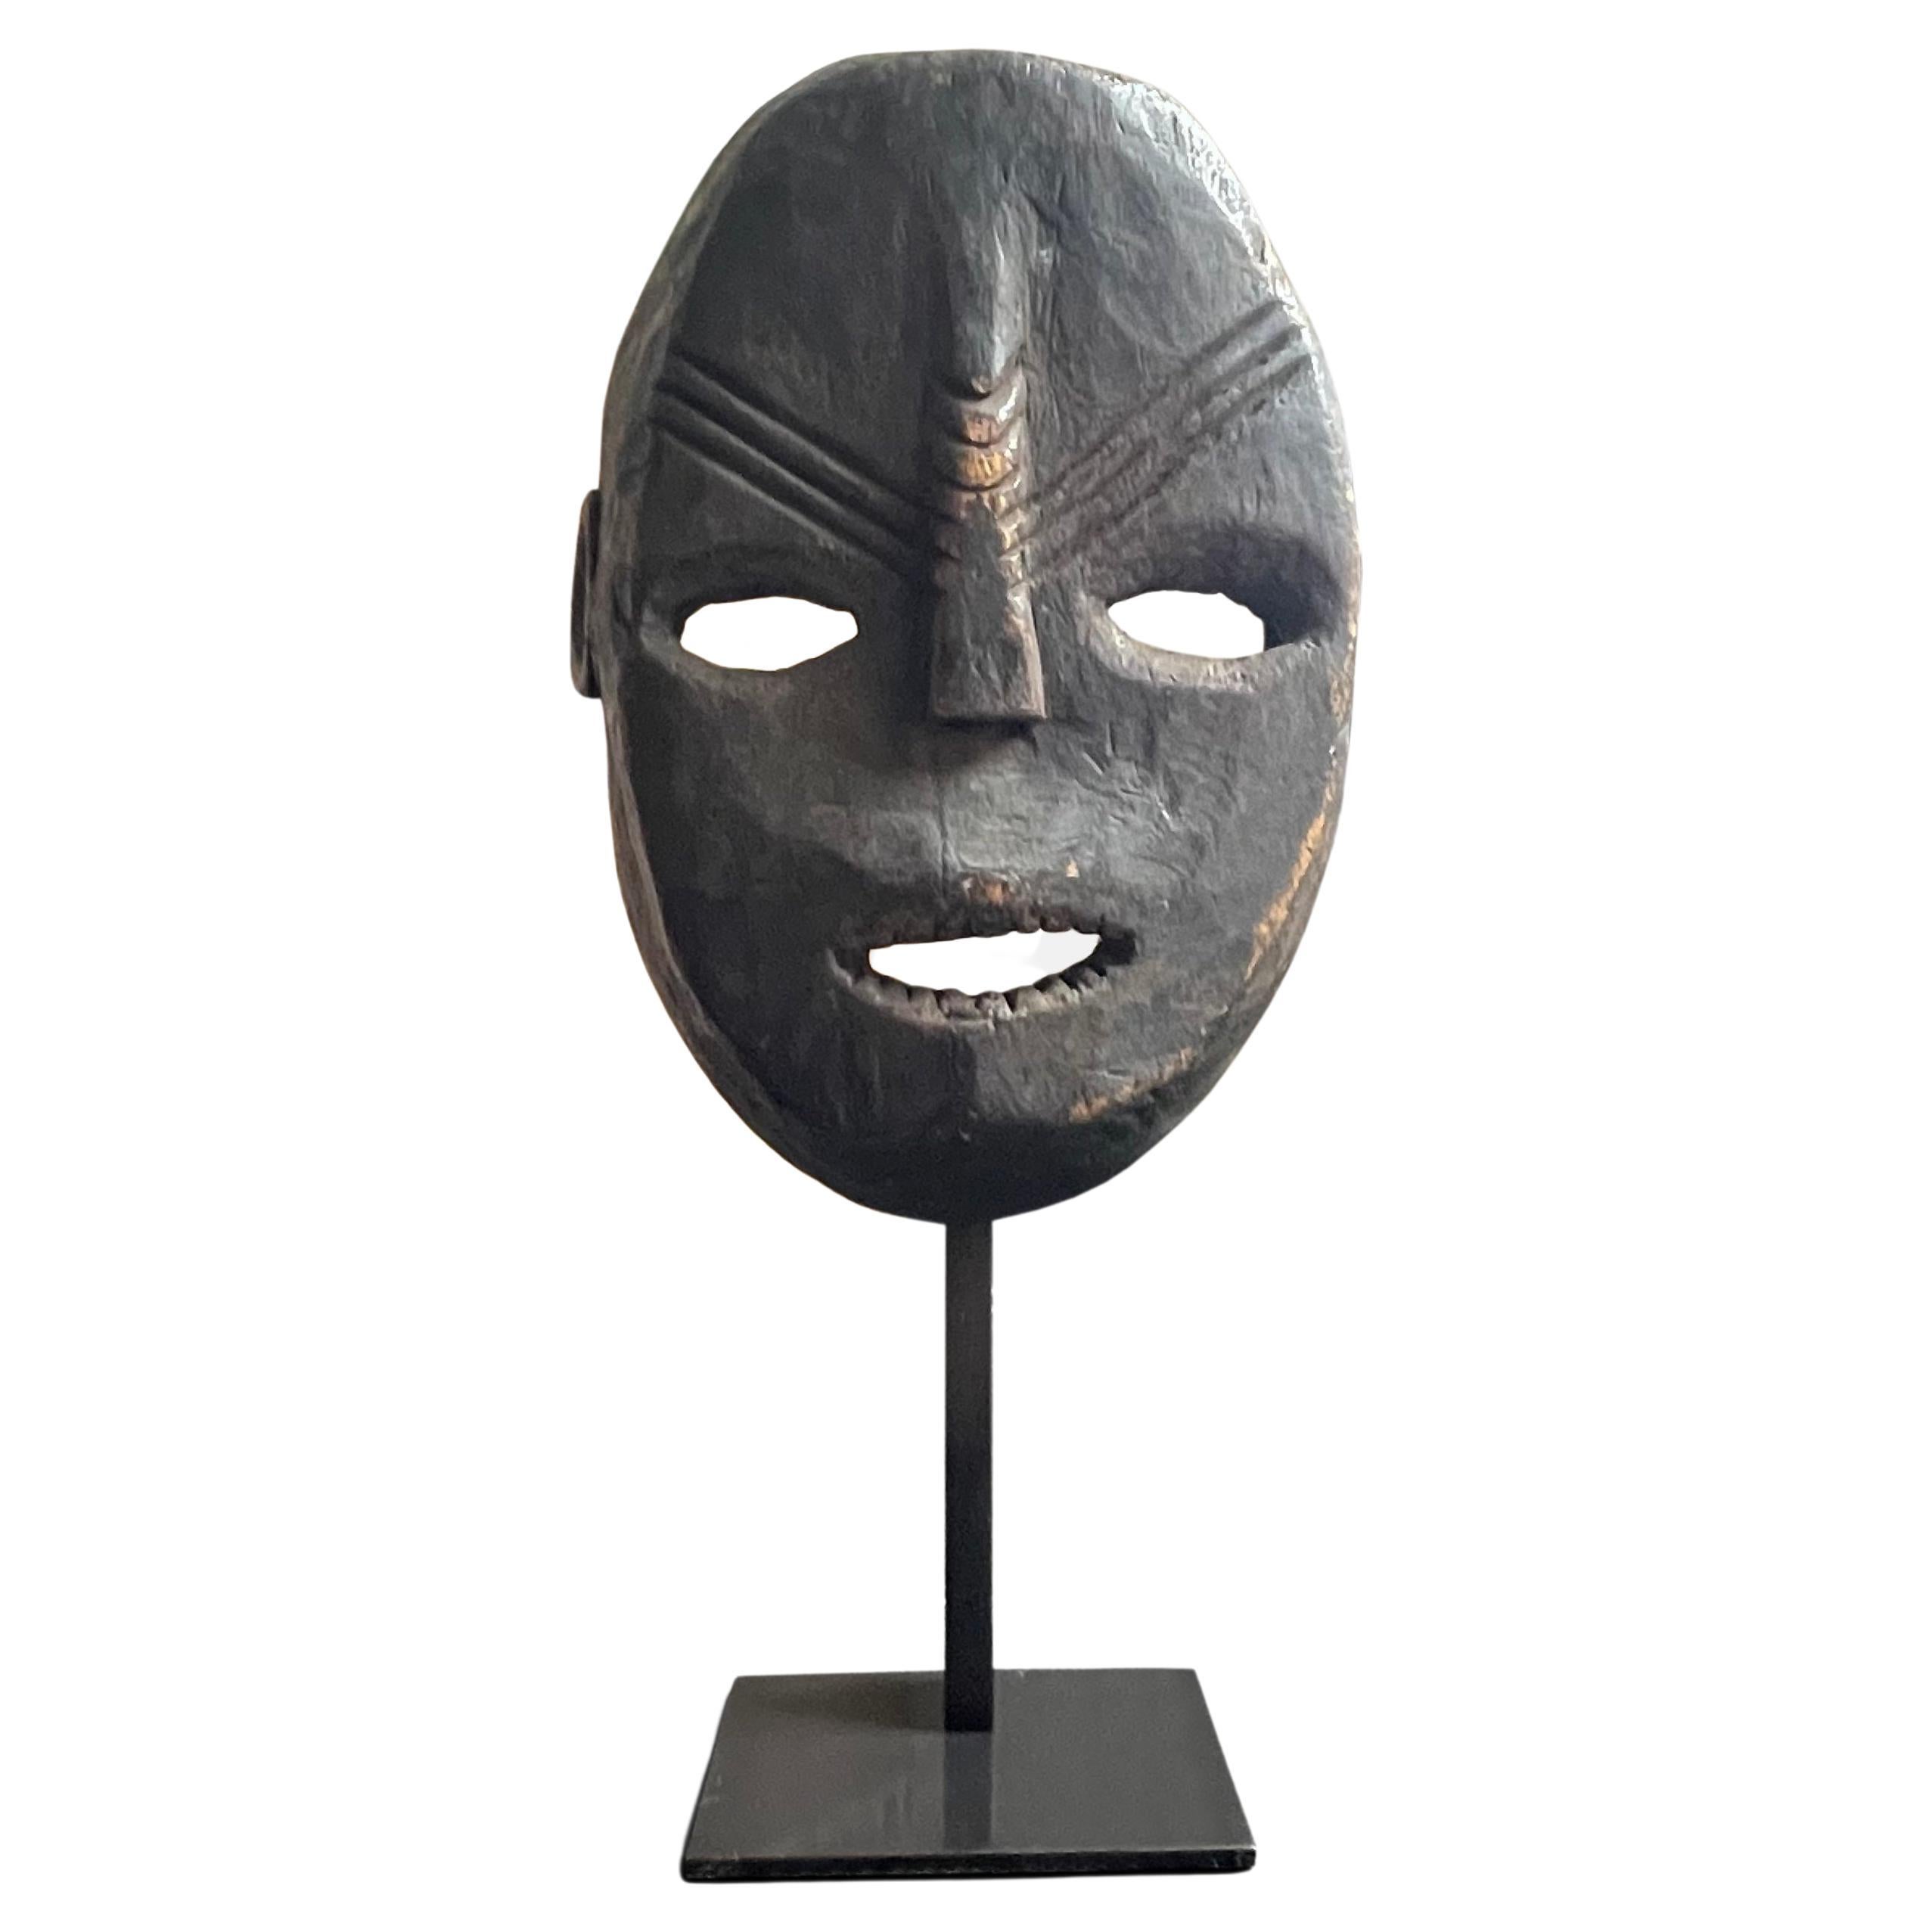 Ngbaka Congolese Tribal Mask for Initiation Rituals, Early 20th Century For Sale